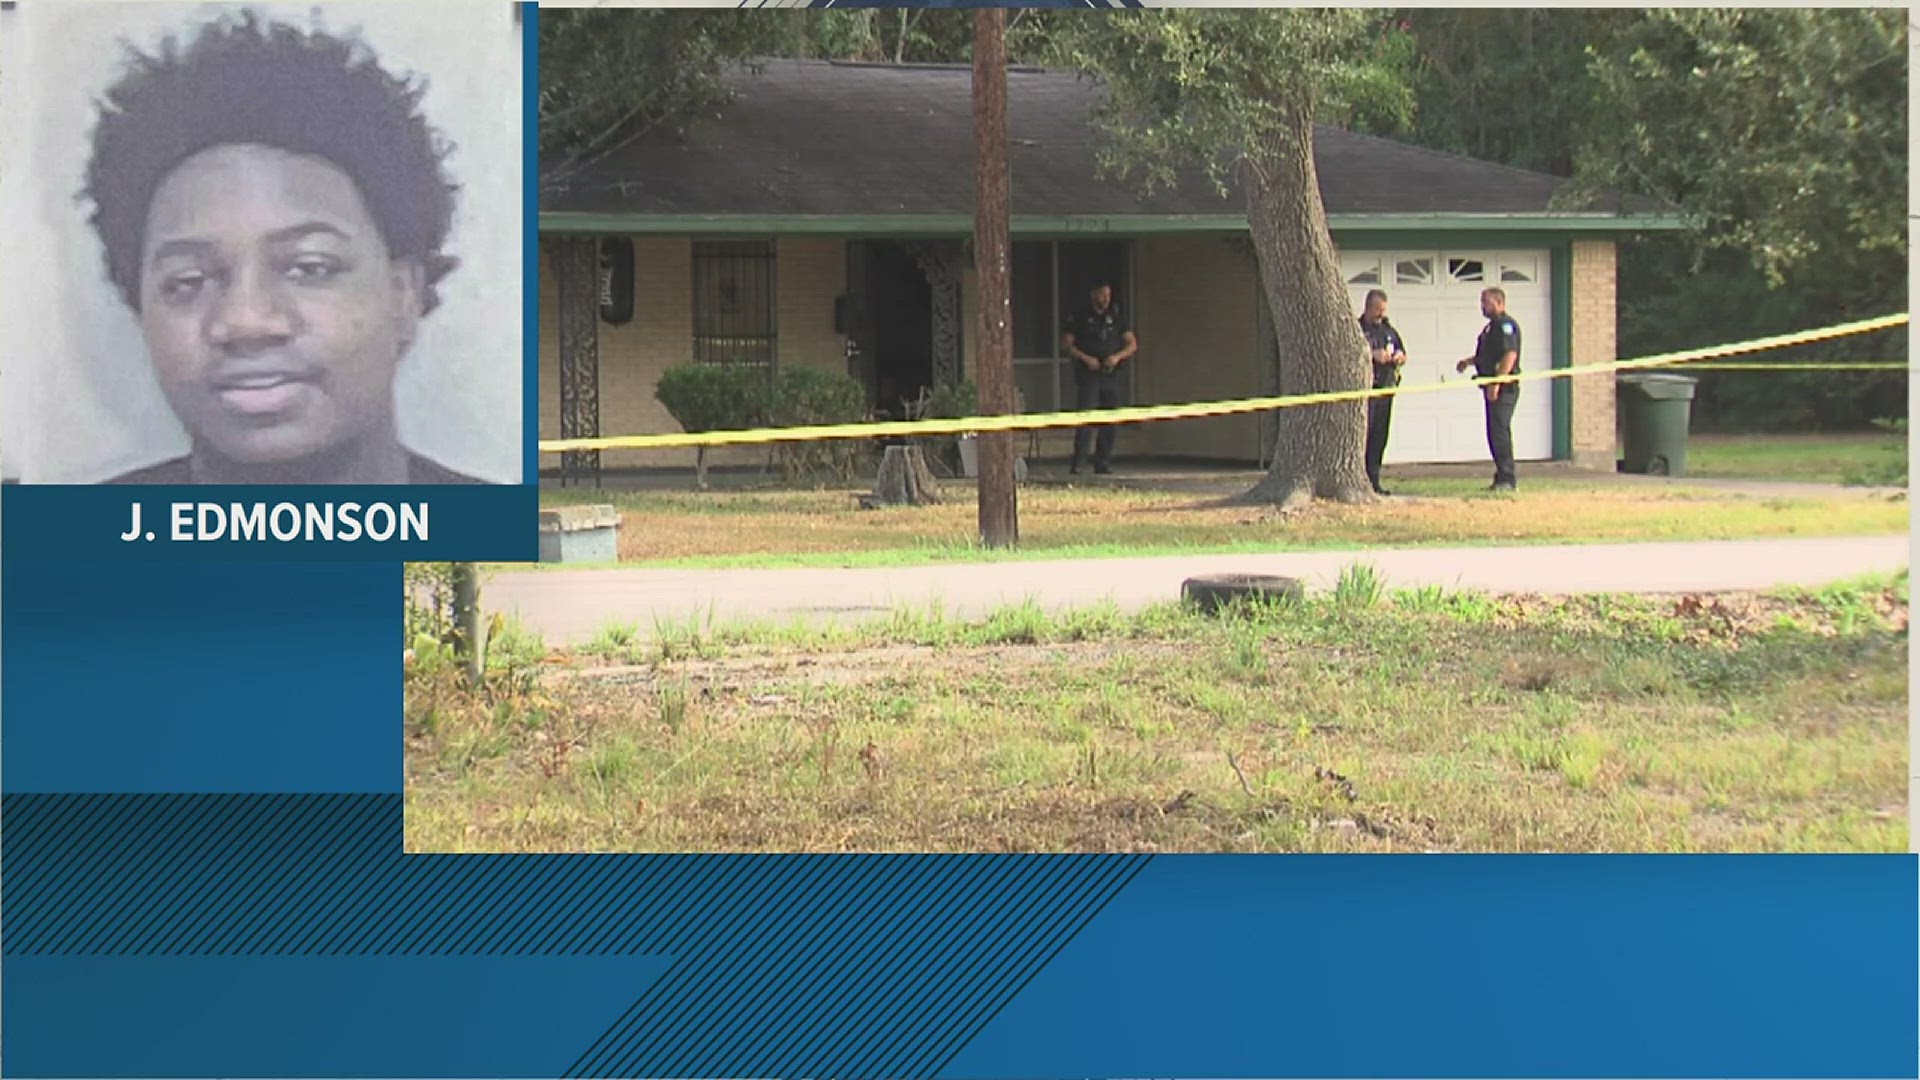 Officers were sent to the 1200 block of Fairway St in Beaumont just after 9 a.m. Tuesday morning.